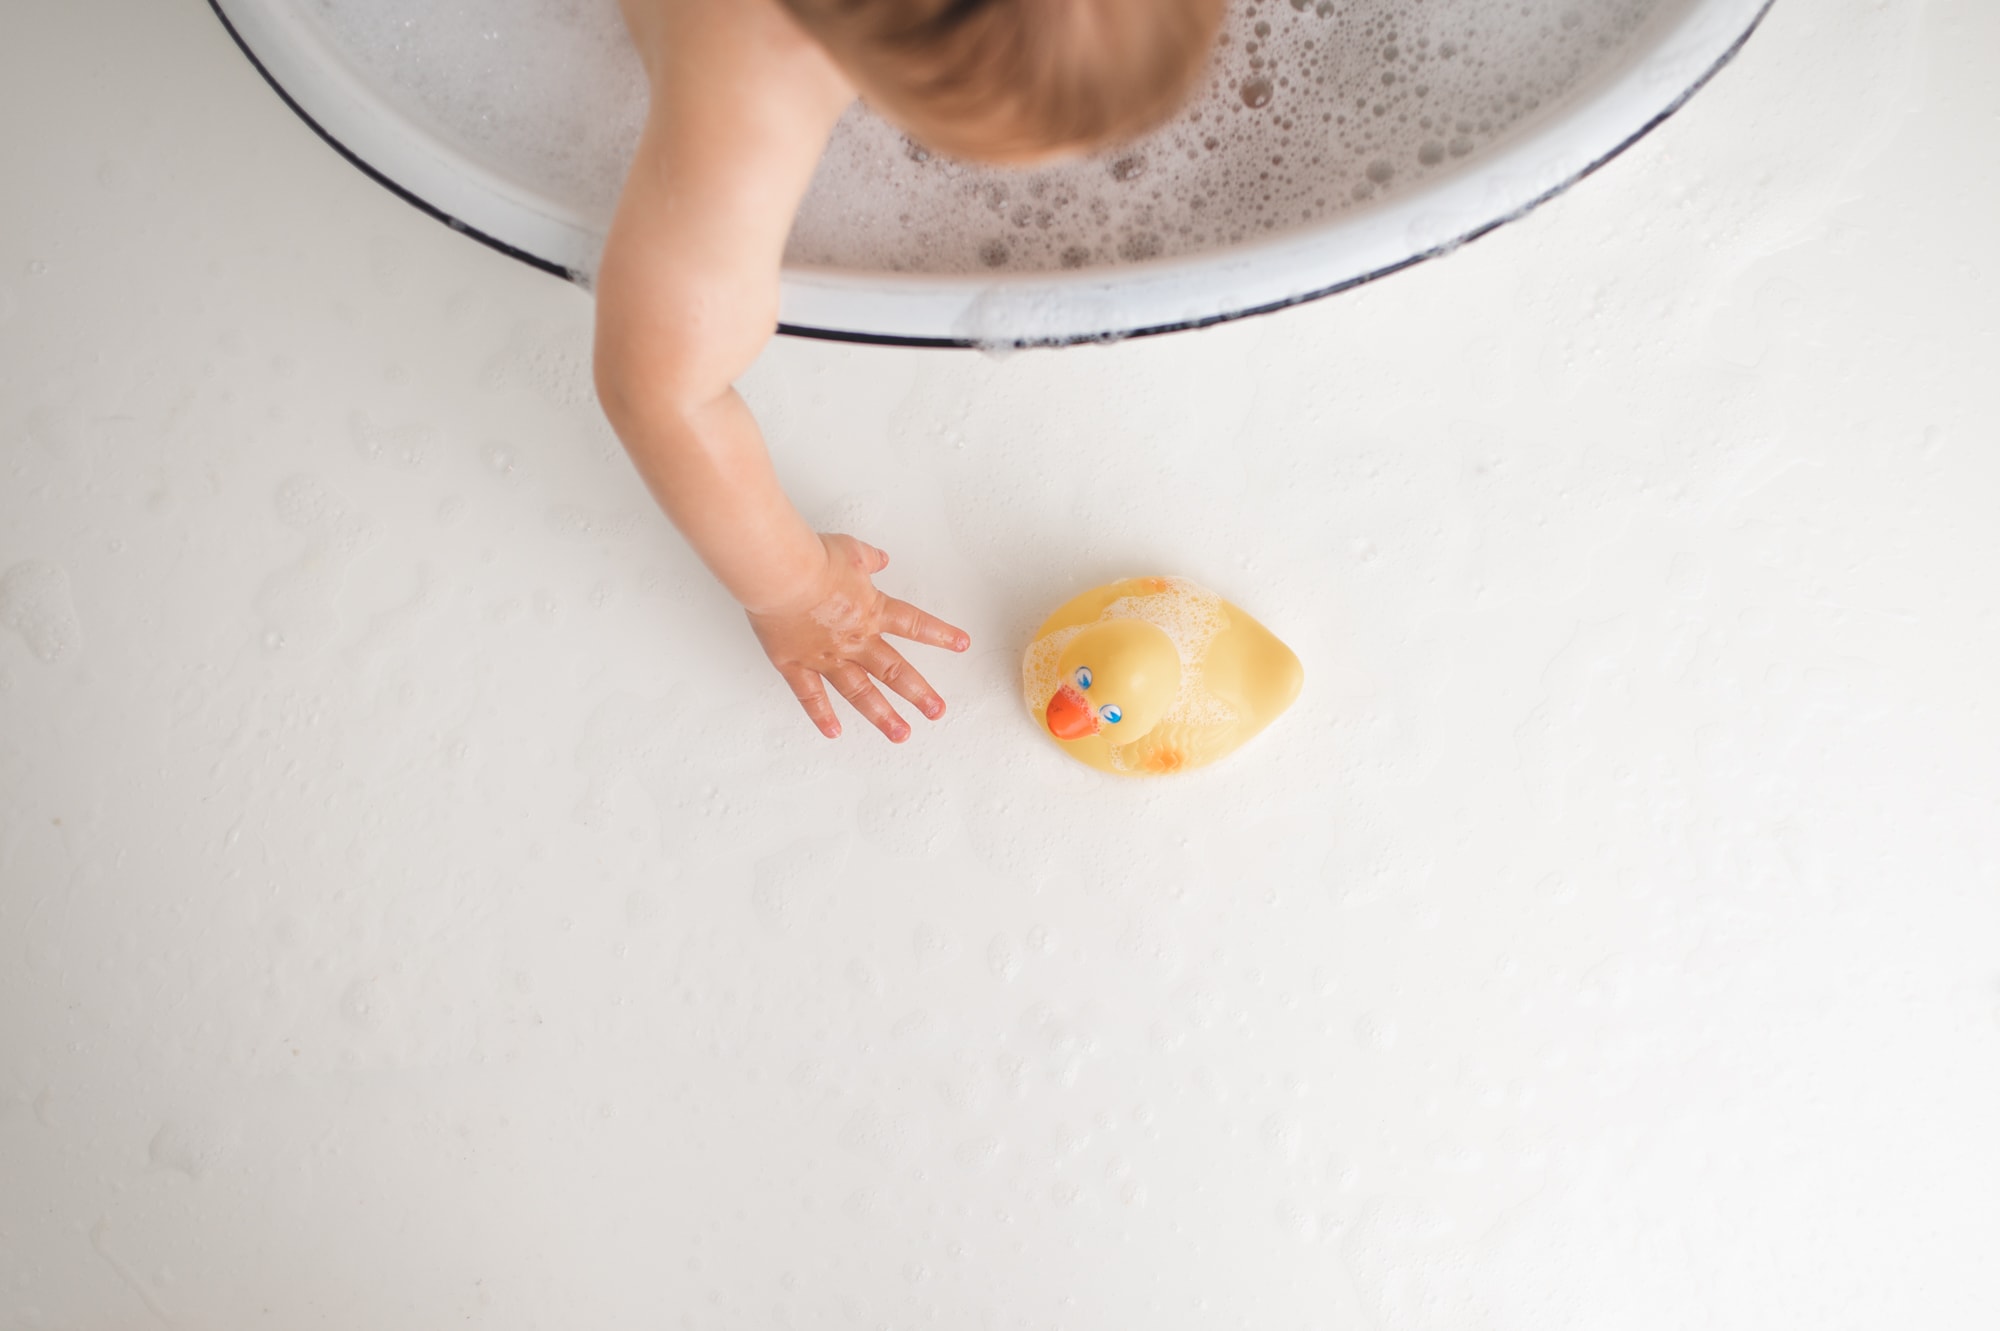 Overhead view of a baby's arm reaching out of a bubble bath towards a yellow toy duck.